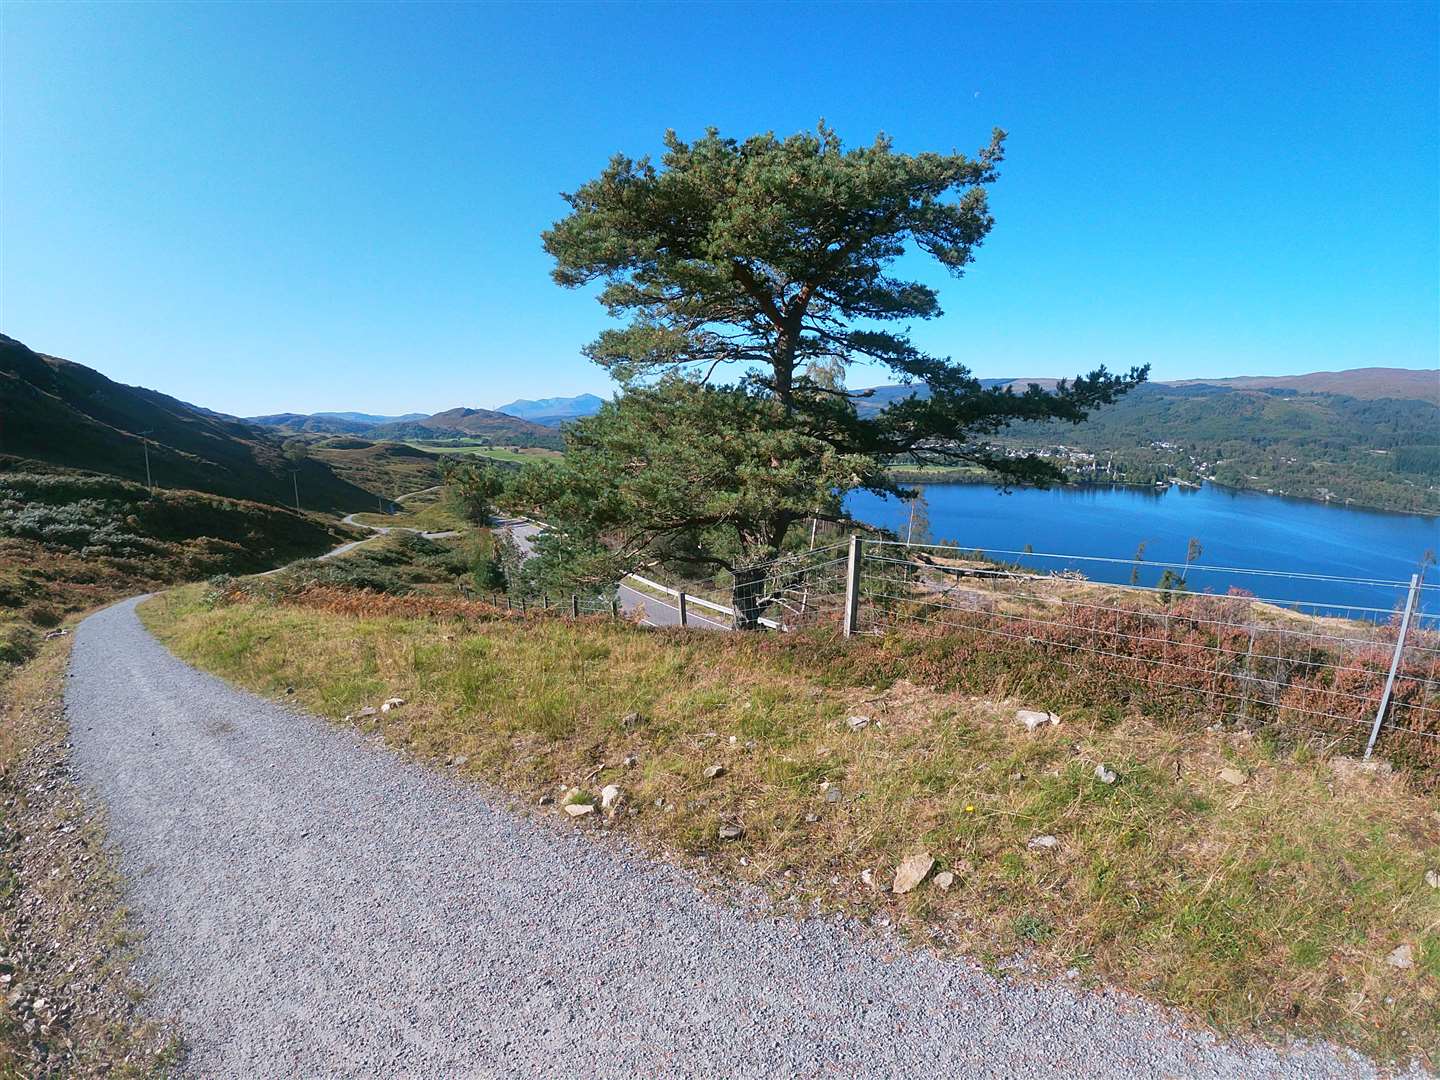 Looking over the military road back down to Fort Augustus from the South Loch Ness Trail path..